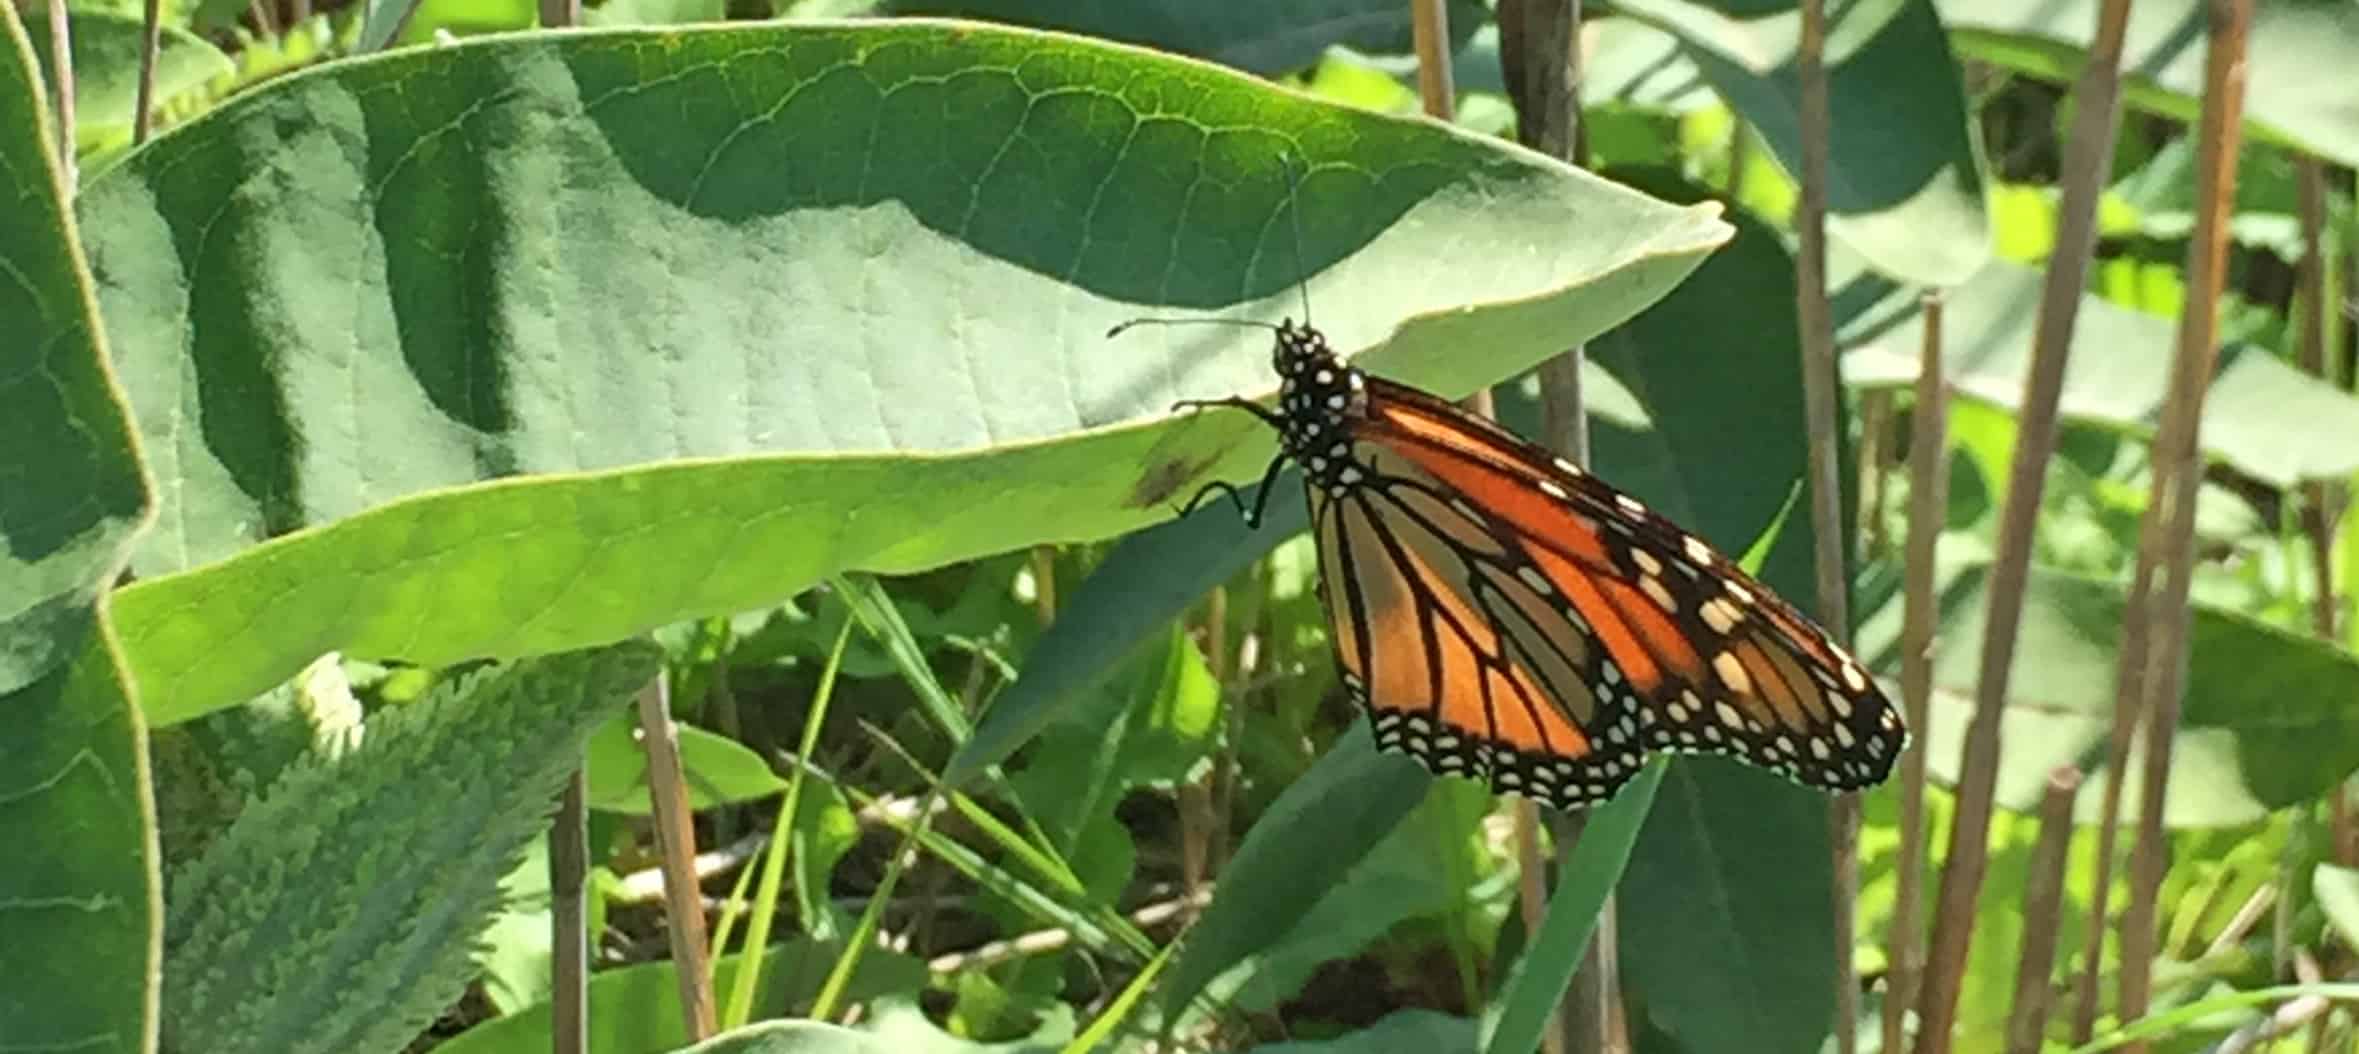 Years of monarch research shows how adding habitat will help